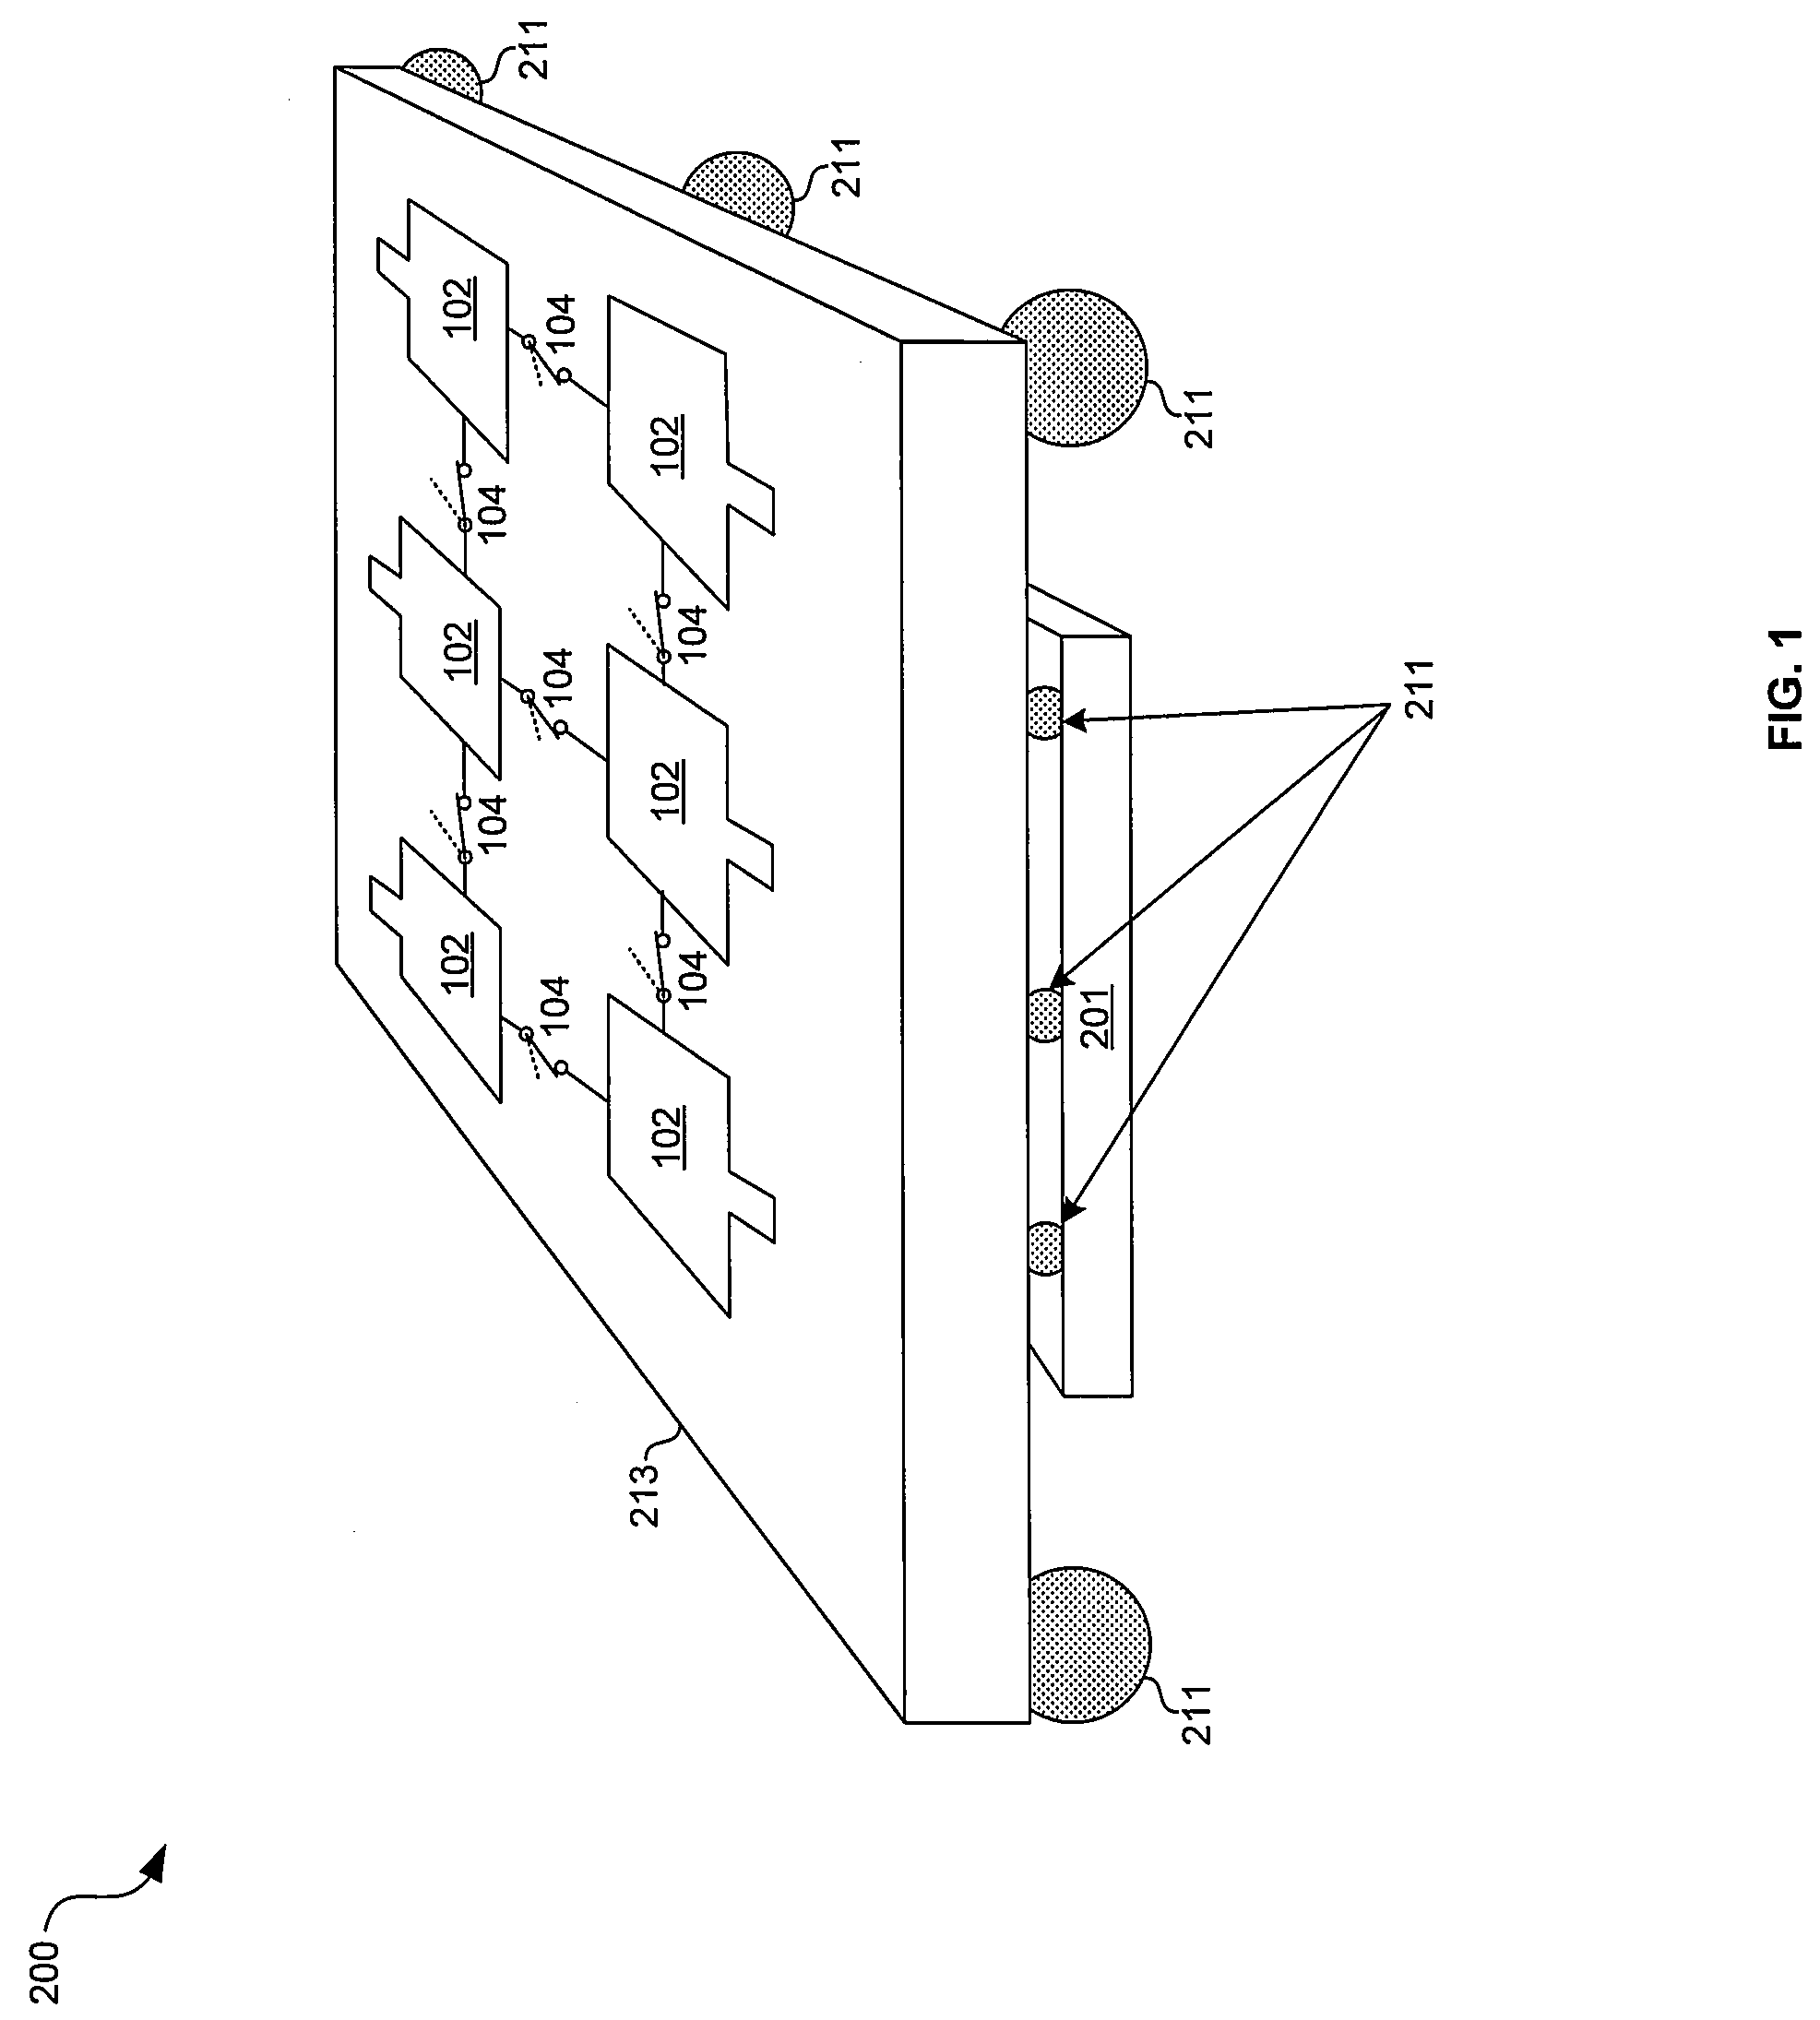 Method and system for configurable antenna in an integrated circuit package